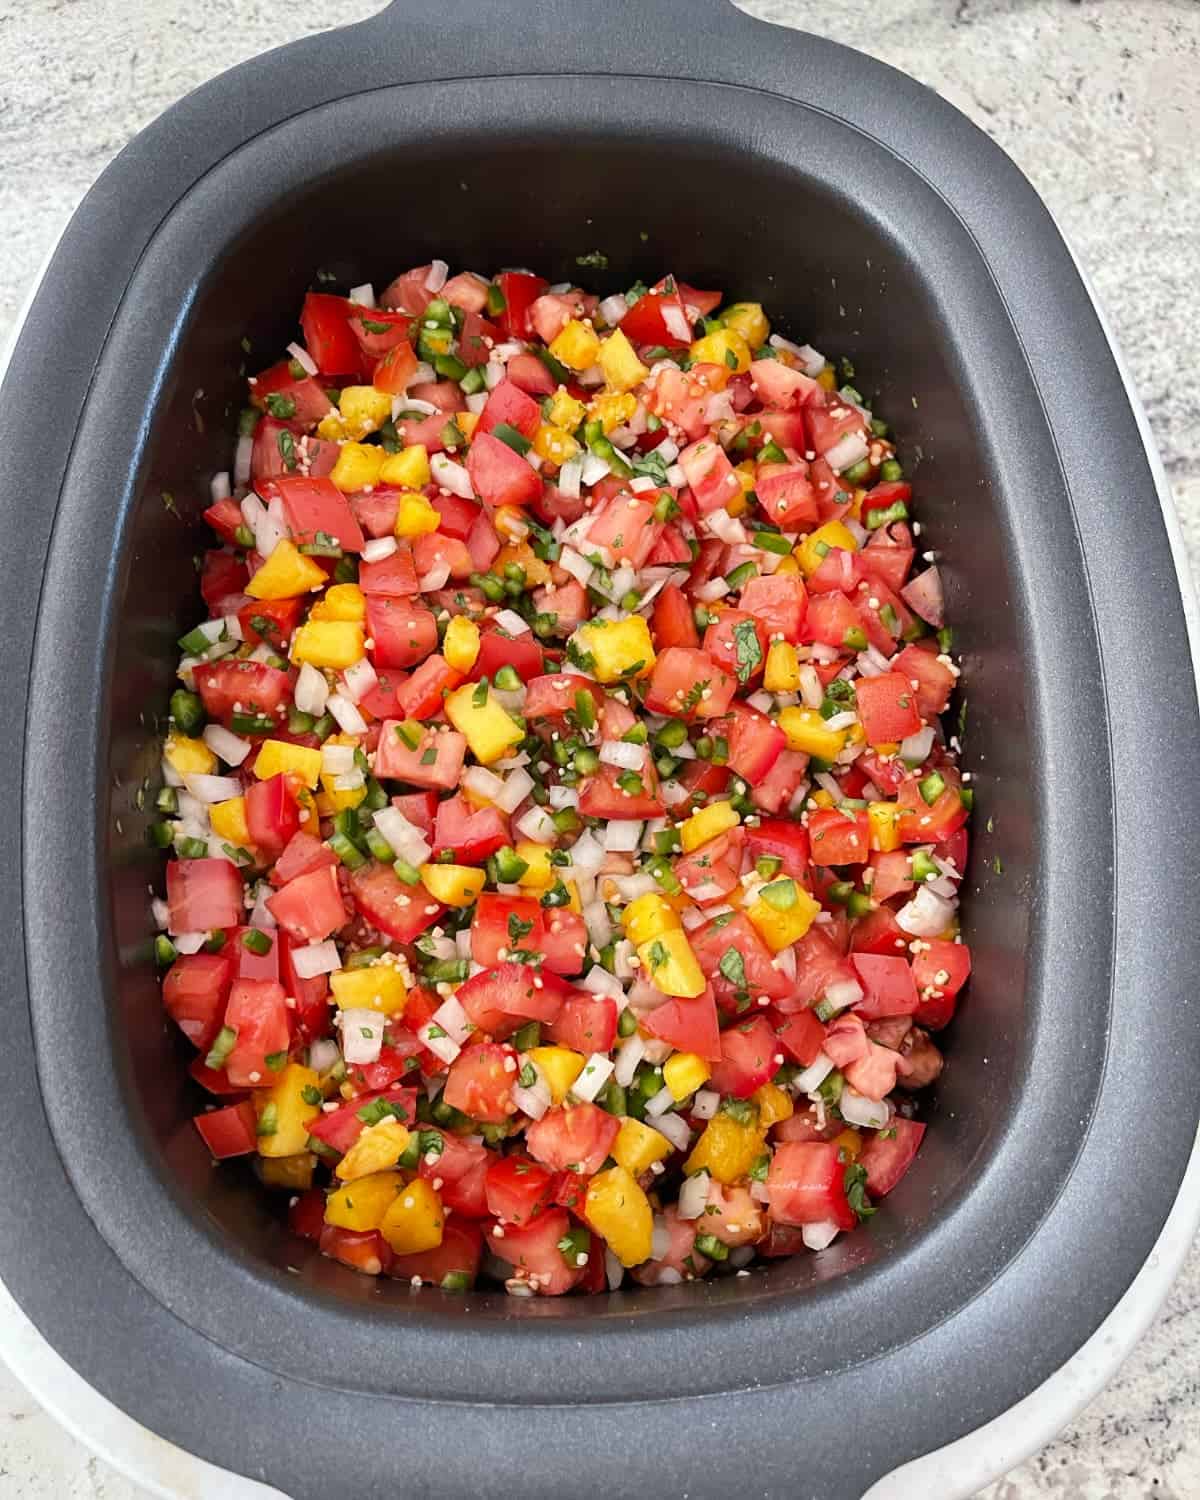 Uncooked peach salsa - chopped tomatoes, peaches, jalapeno peppers, onion, minced garlic and cilantro - in black crock pot.